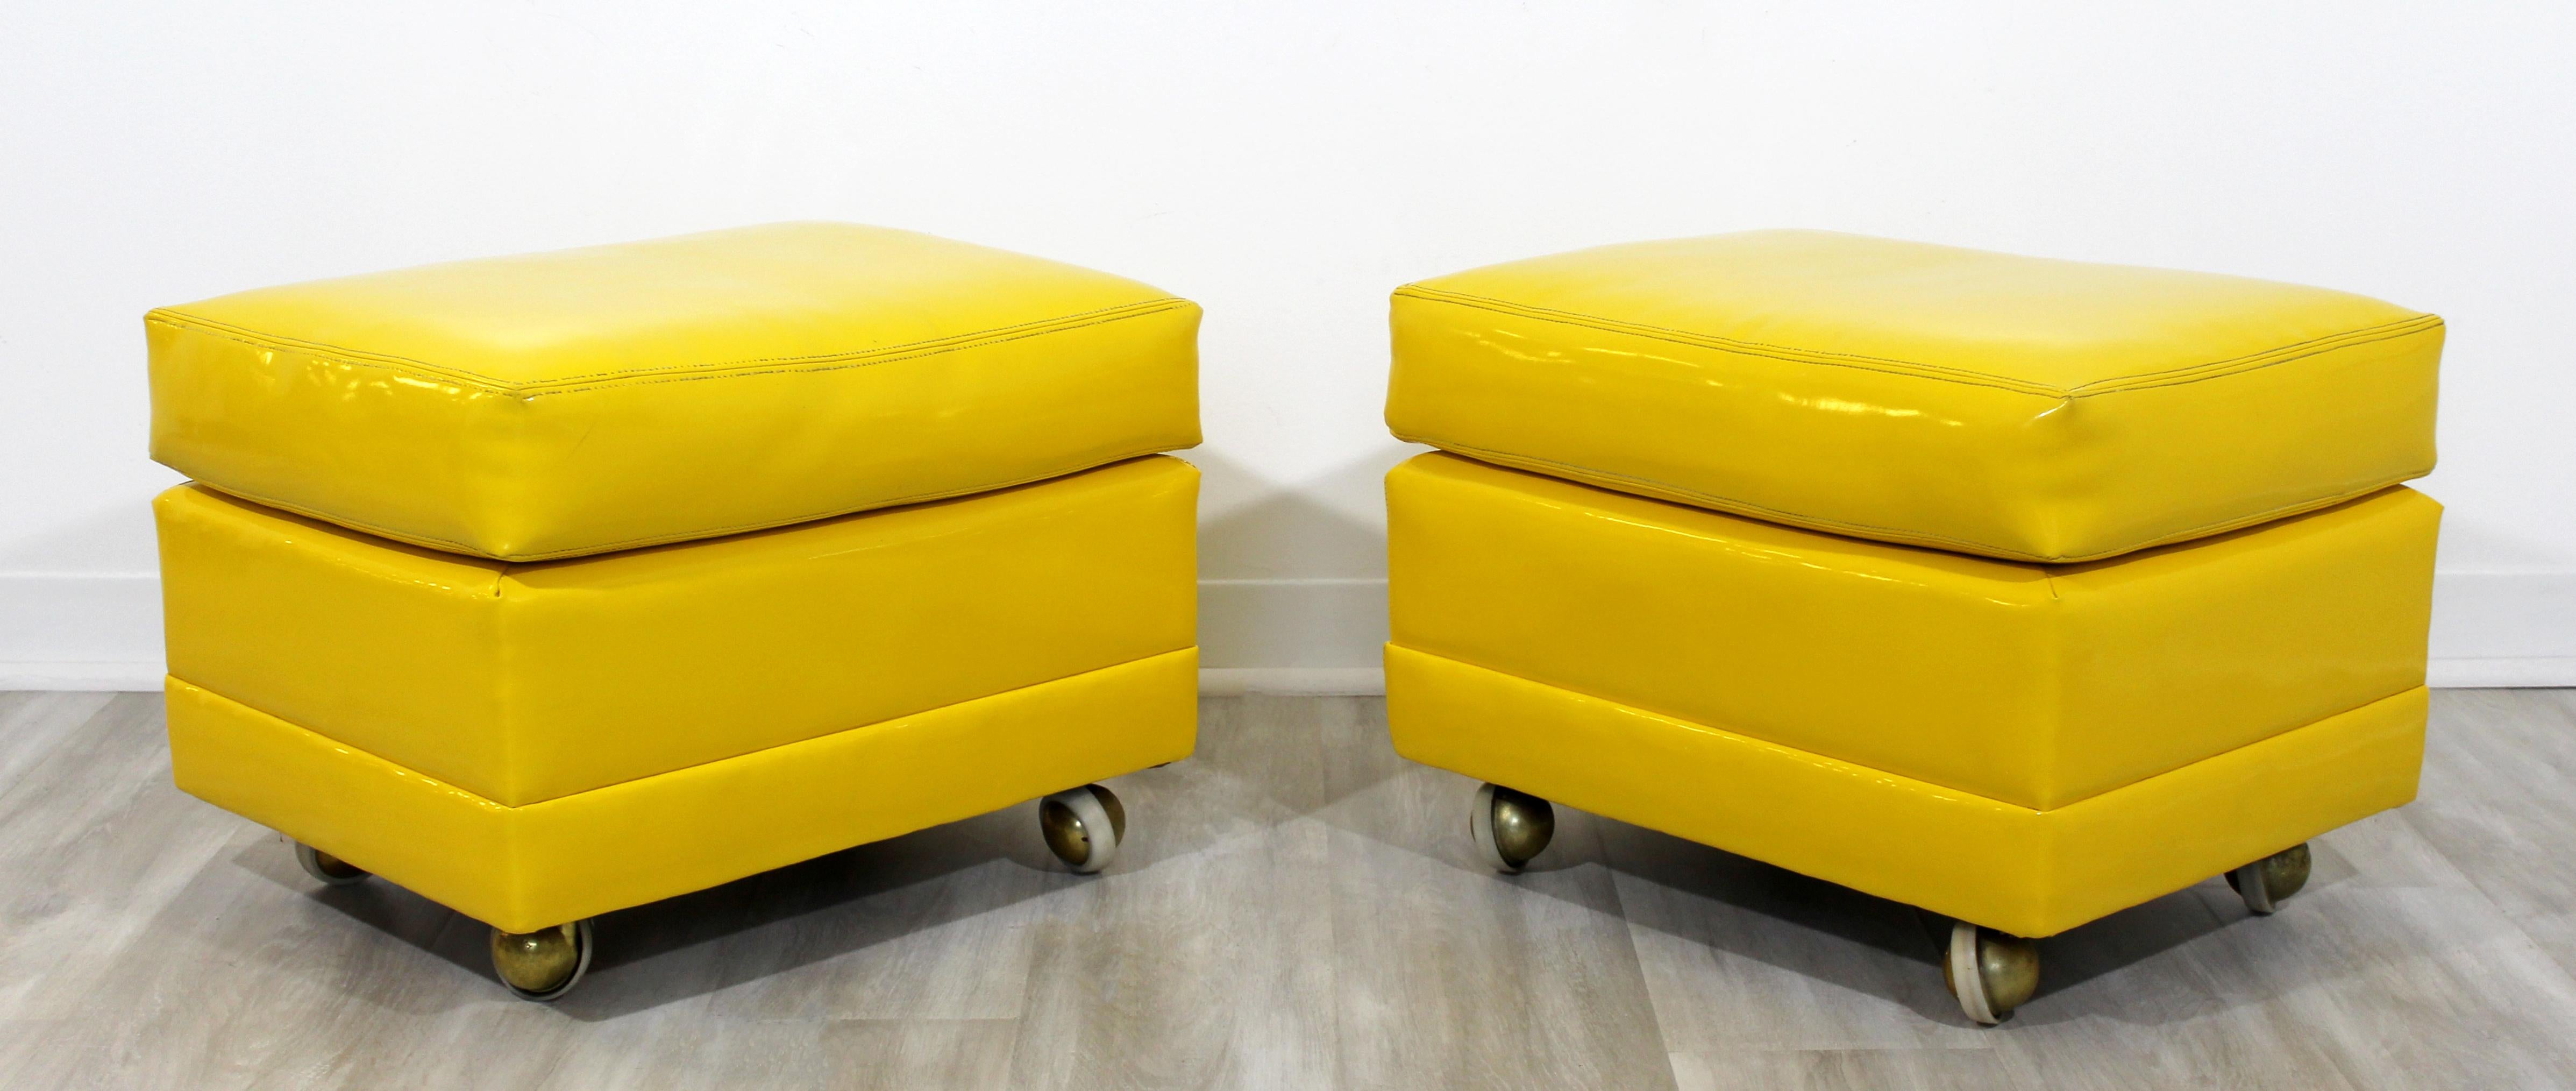 American Mid-Century Modern Pair of Yellow Vinyl Stools Benches Seats Ottomans Casters